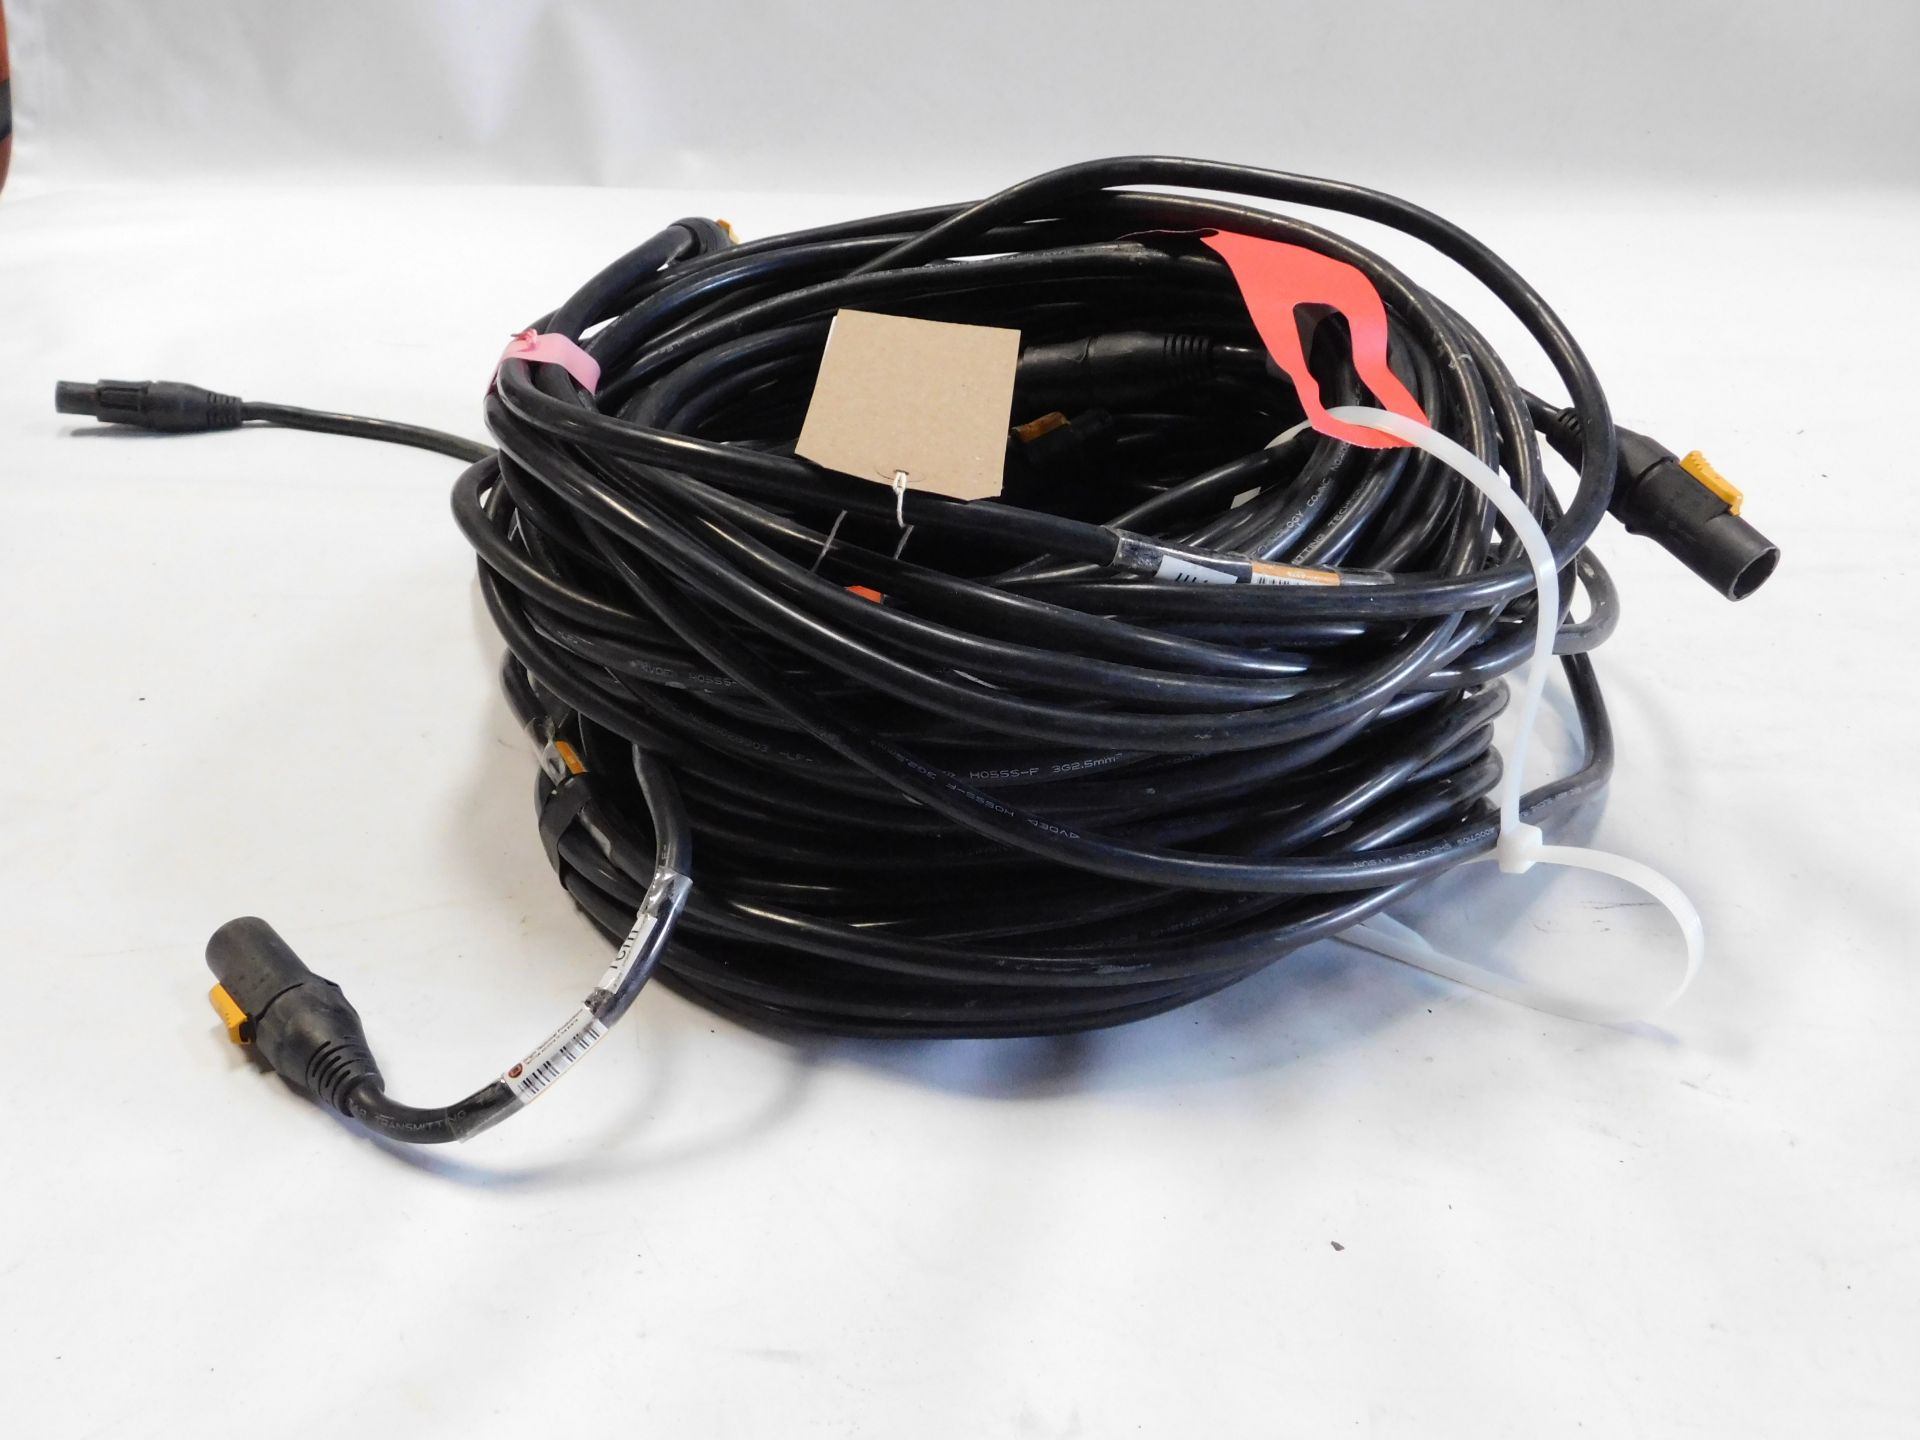 6 Truecon Cables, 7m (Location: Brentwood. Please Refer to General Notes)